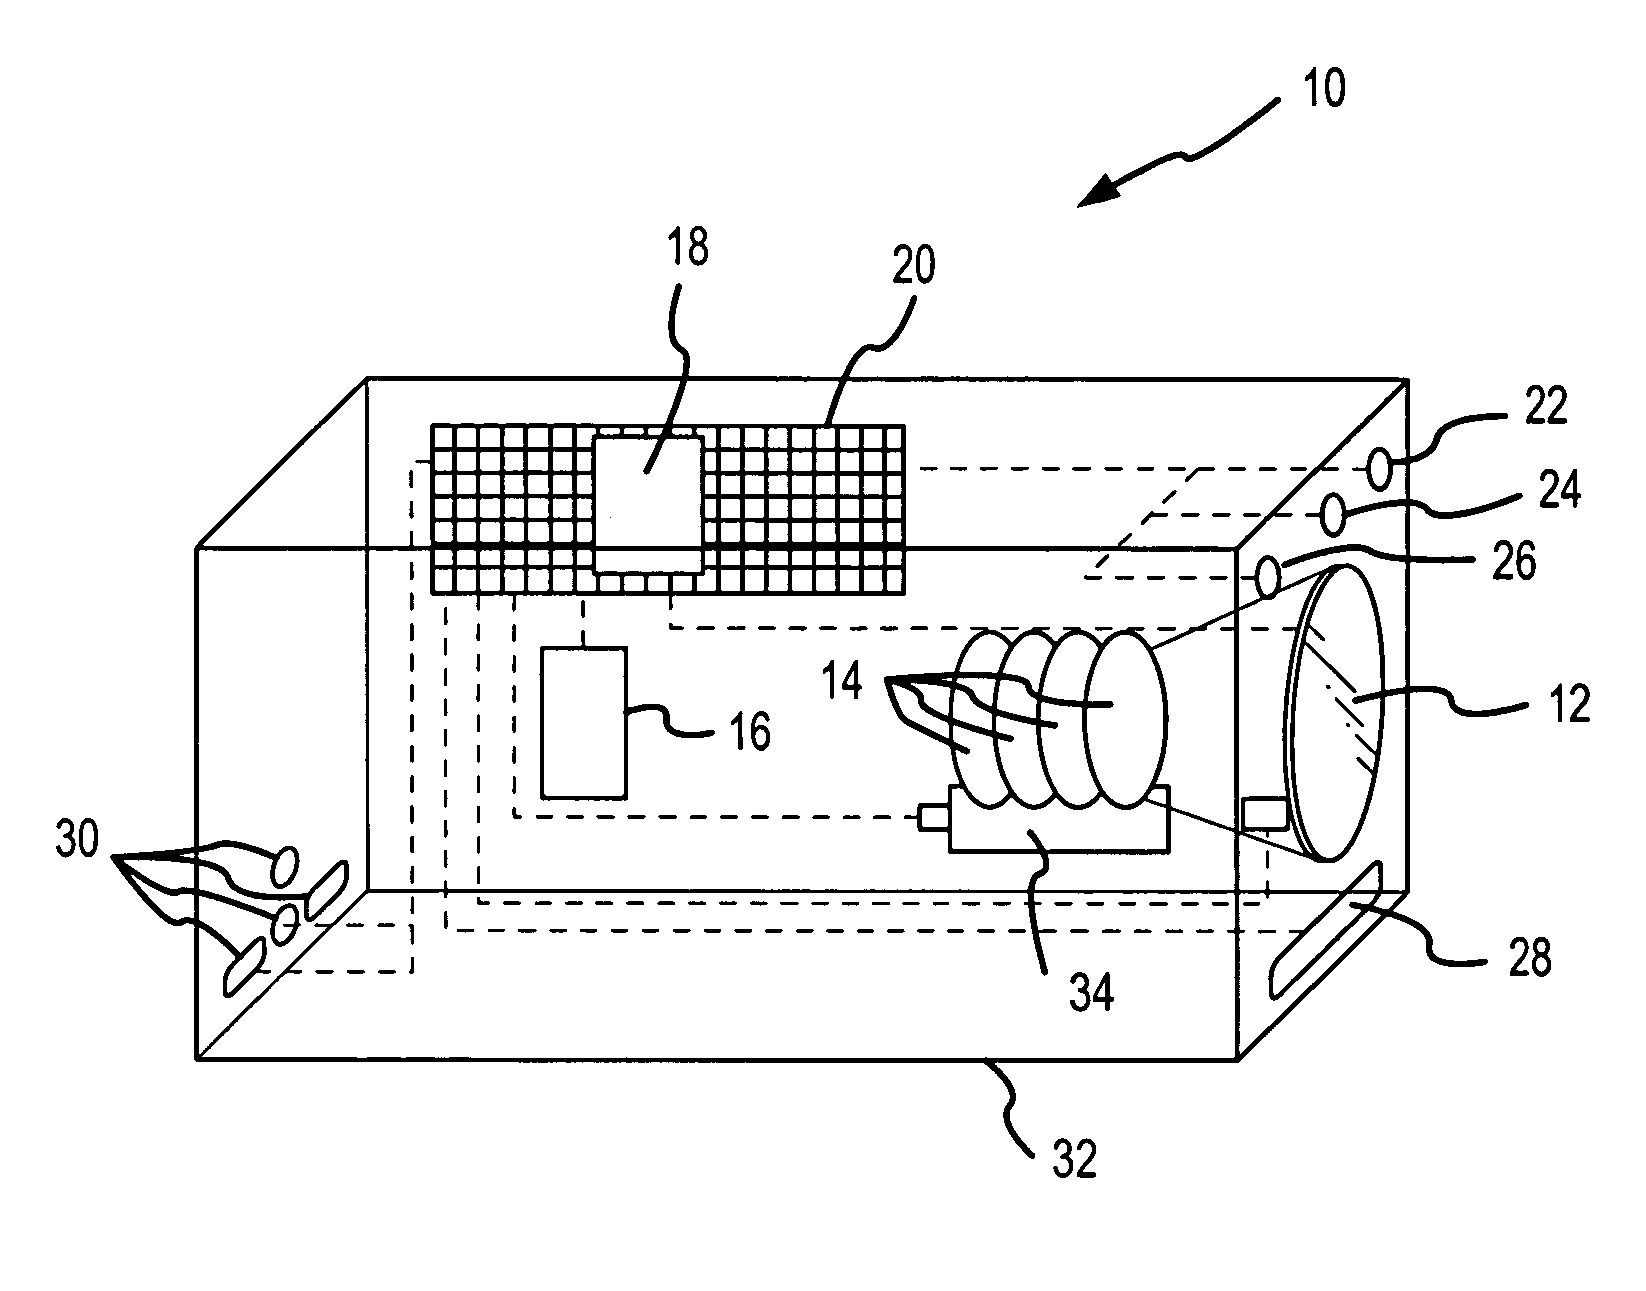 Infrared camera system and method